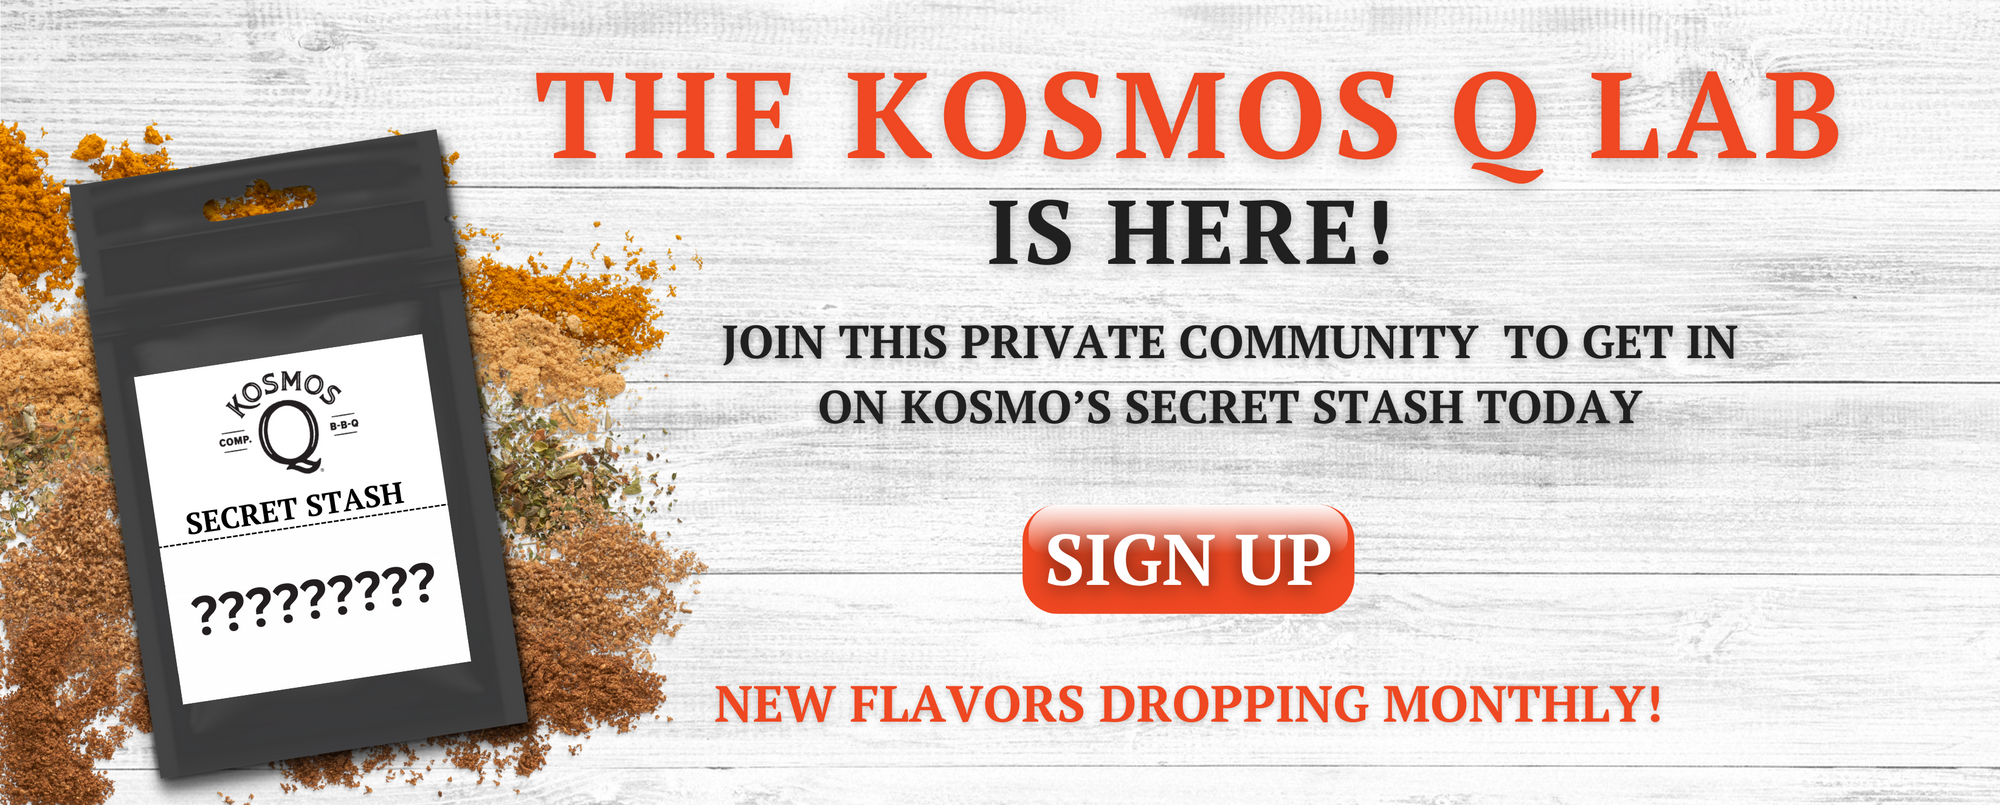 The Kosmos Q Lab is Here! Join this private community to get in on Kosmo's secret stash today! Sign up! New Flavors Dropping Monthly